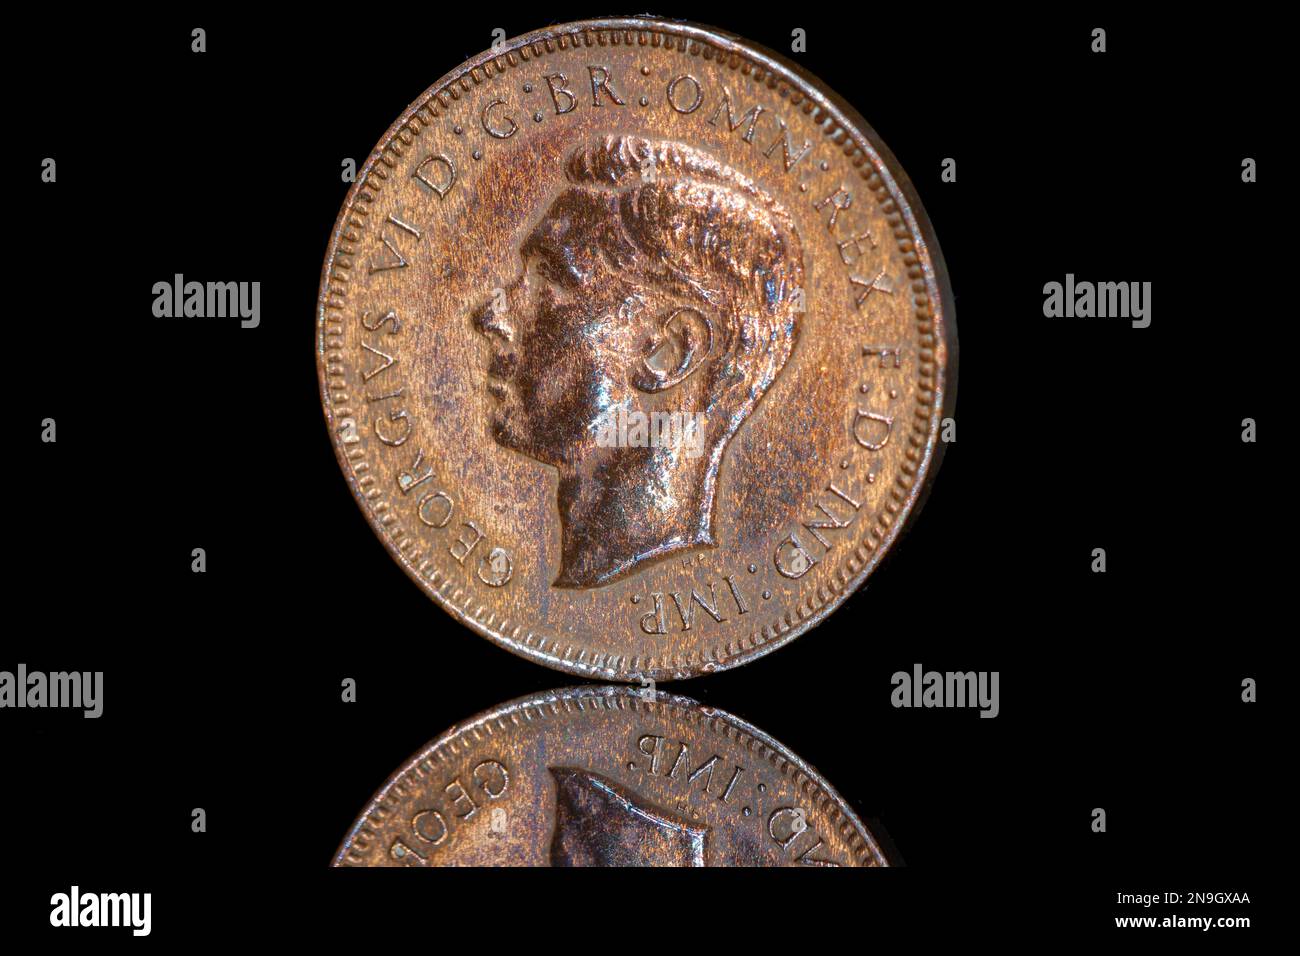 A 1939 Farthing coin featuring George VI portrait Stock Photo